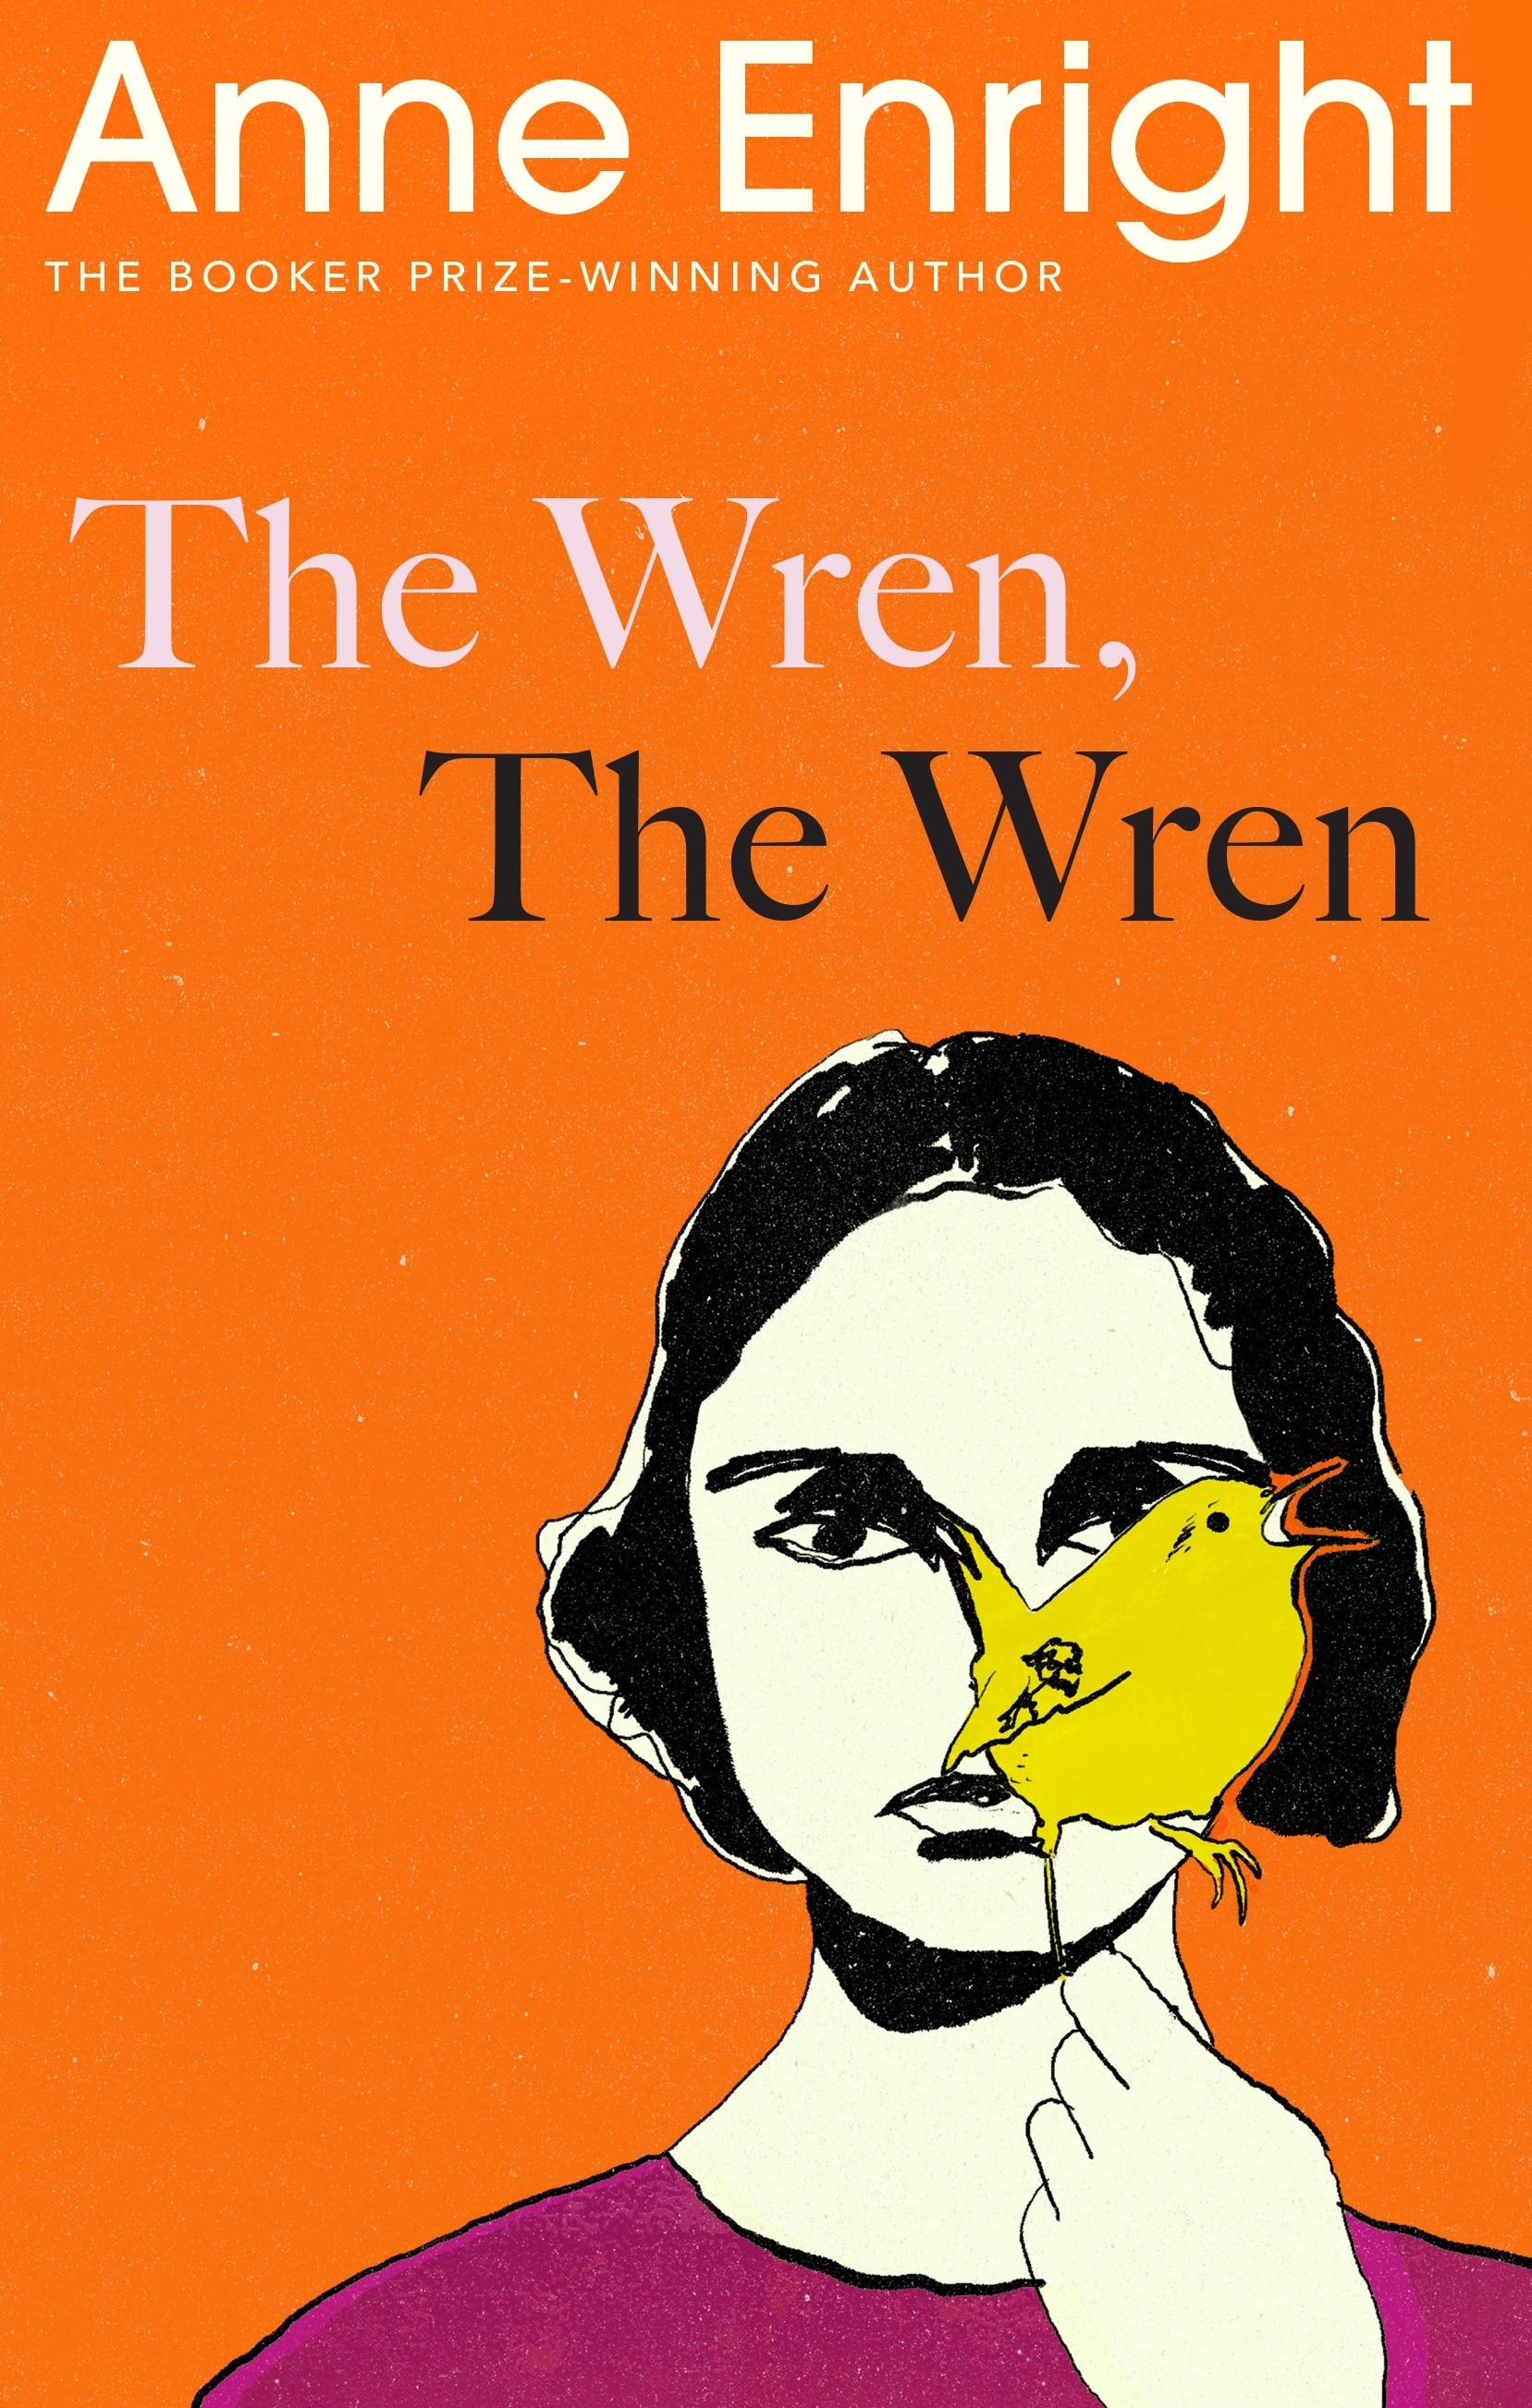 A book cover with an orange background and an illustration of a woman holding a cut out of a bird in front of her face